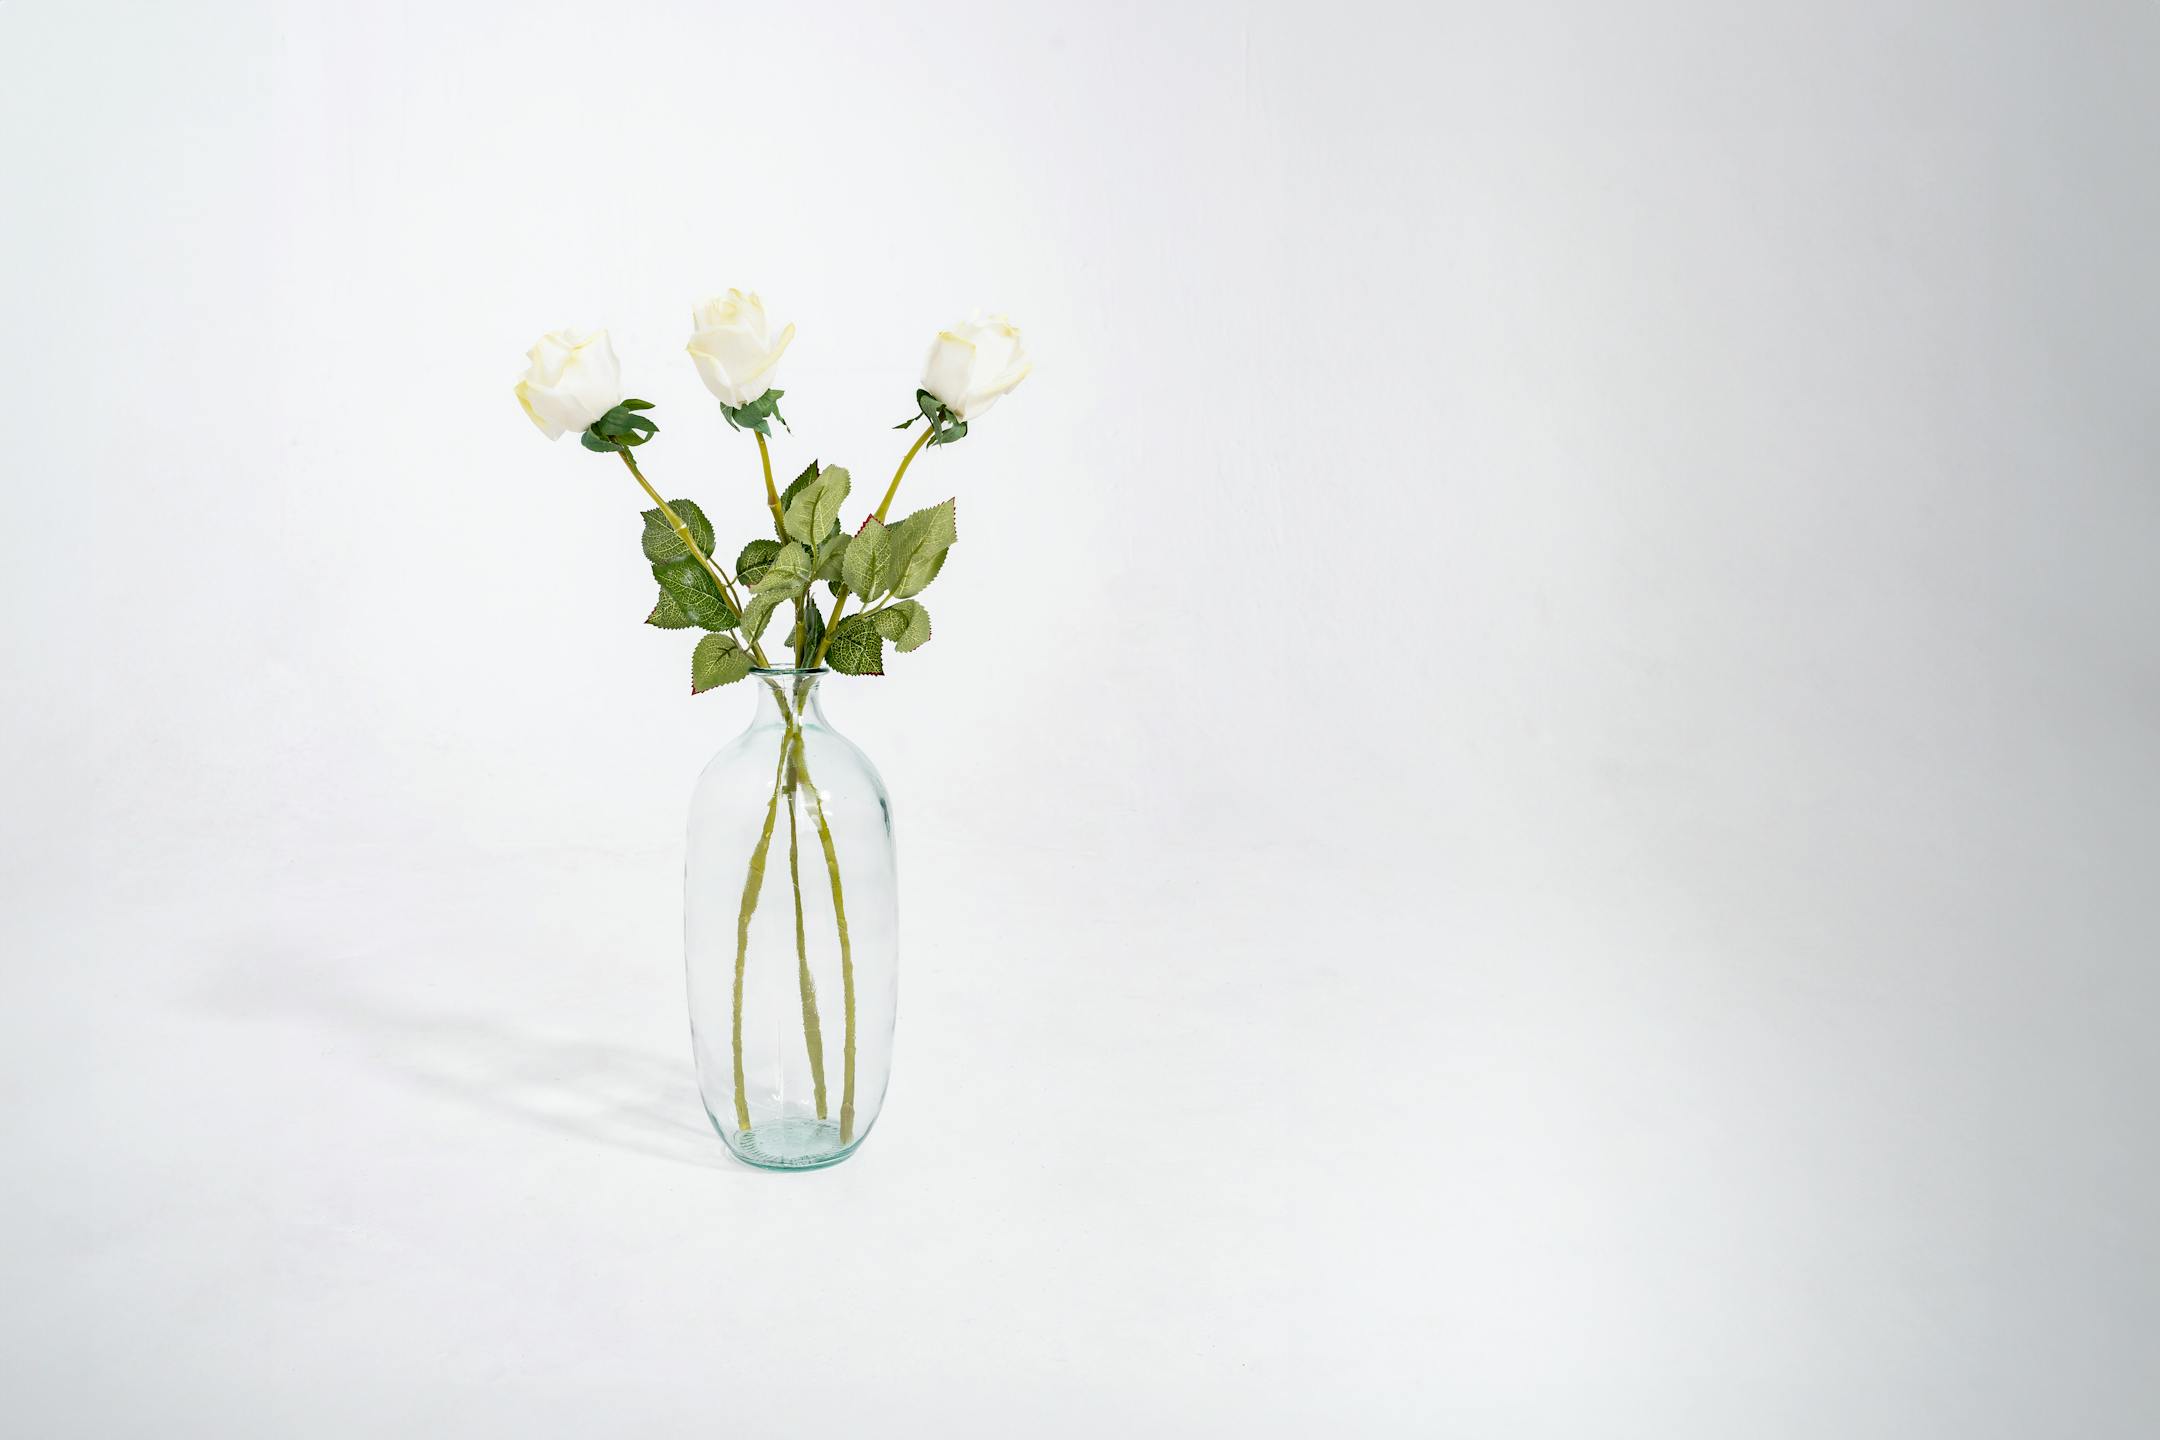 Three white artificial rose bud stems in glass vase